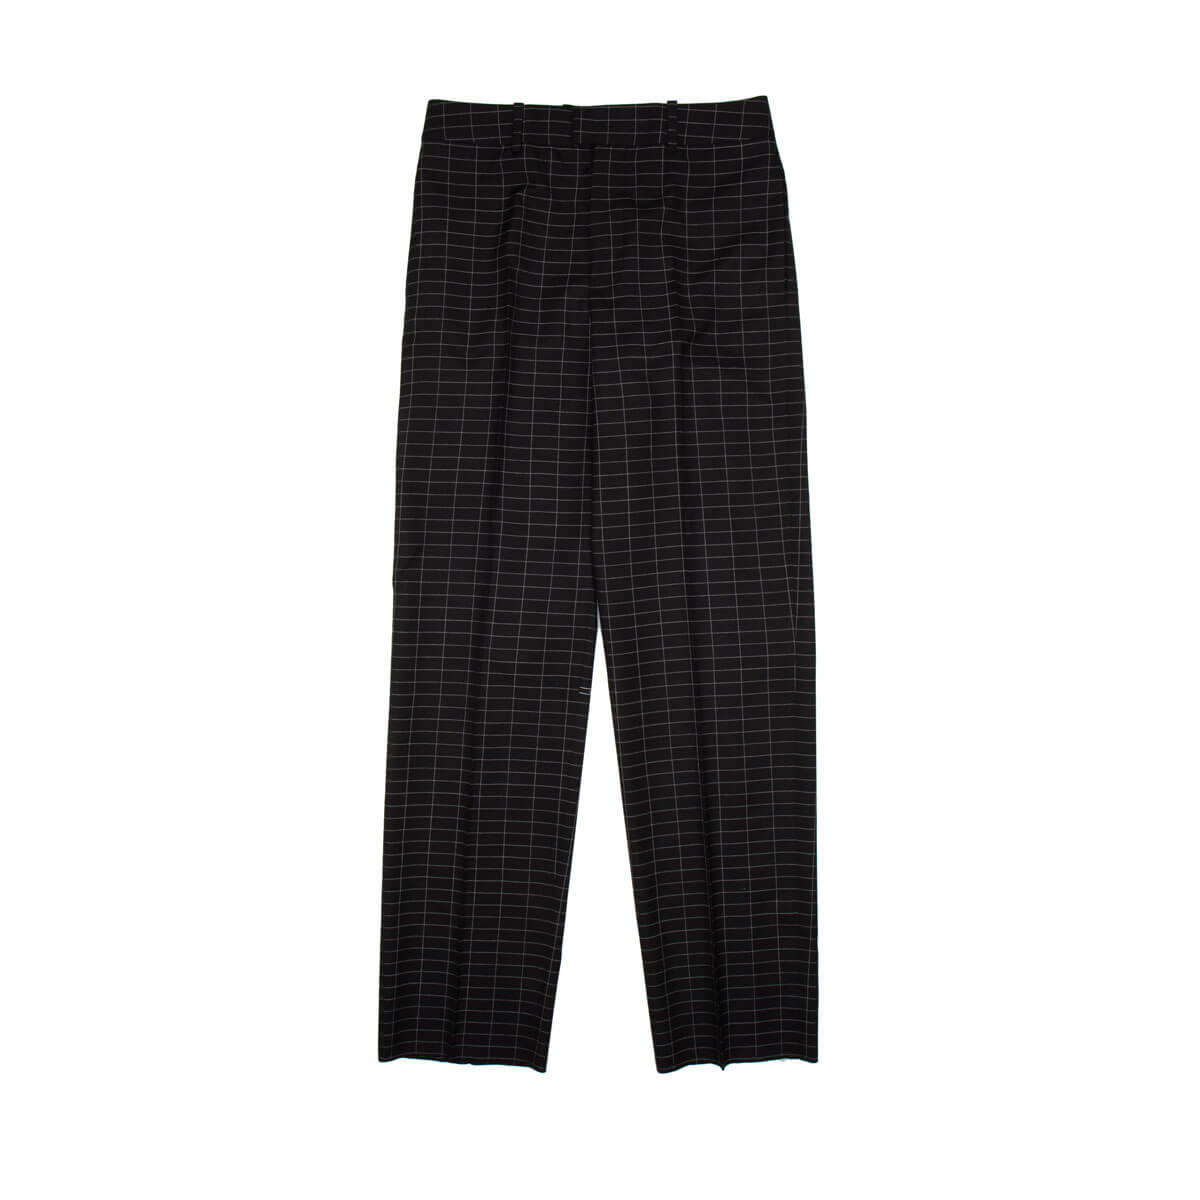 Off-White Patterned Pants